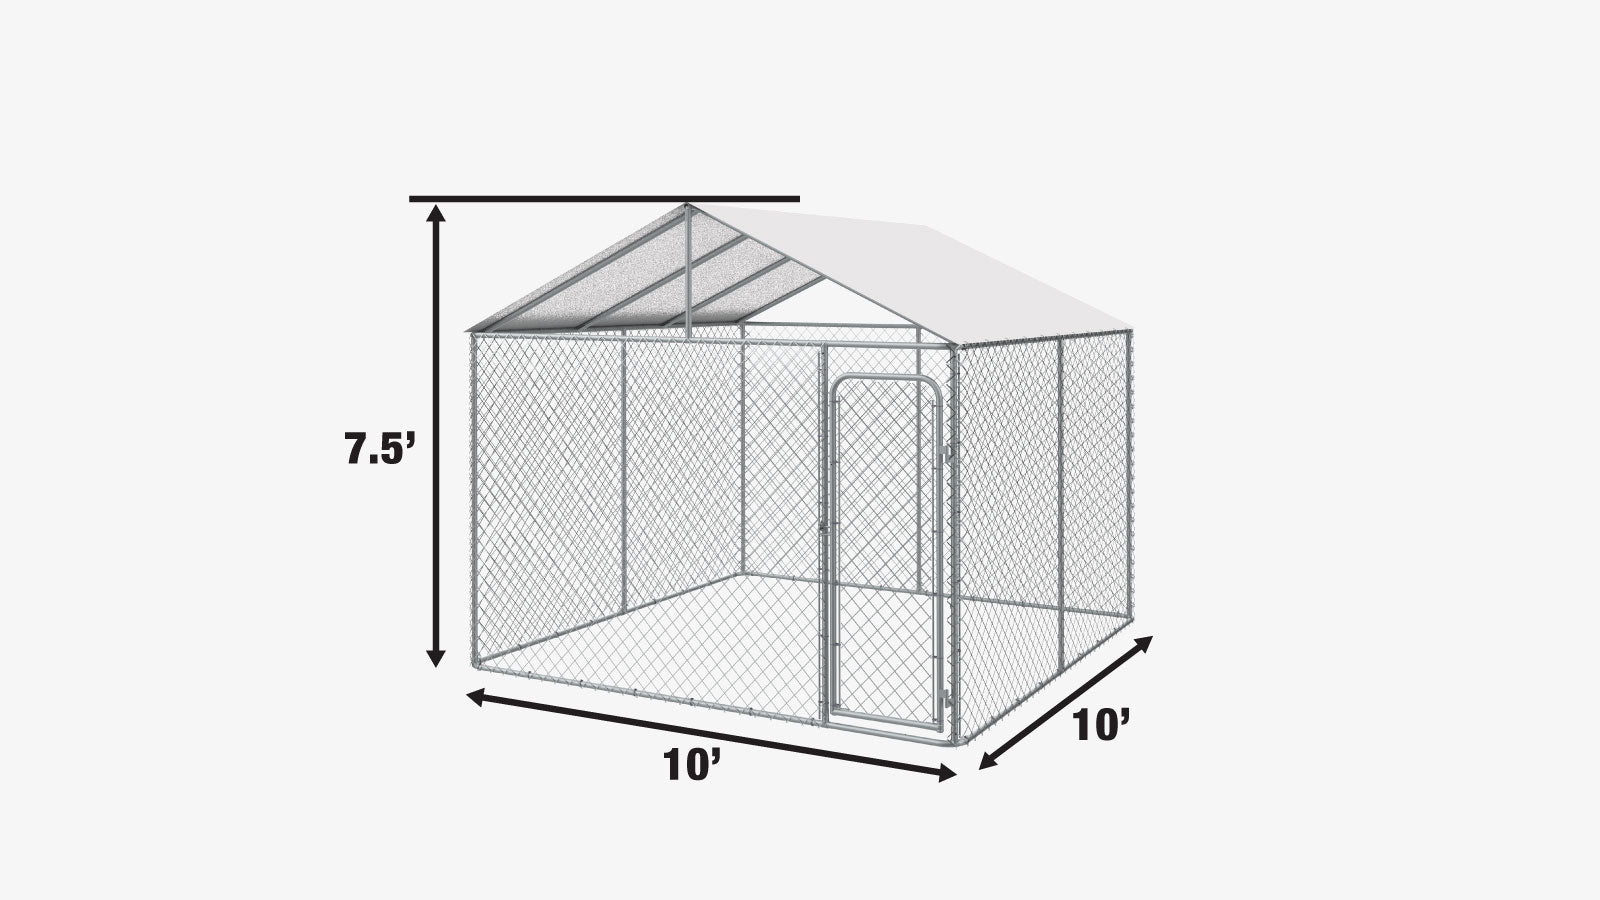 TMG Industrial 10' x 10' Outdoor Dog Kennel Playpen with Cover, Outdoor Dog Runner, Pet Exercise House, Lockable Gate, 6' Chain-Link Fence, TMG-DCP1010-specifications-image